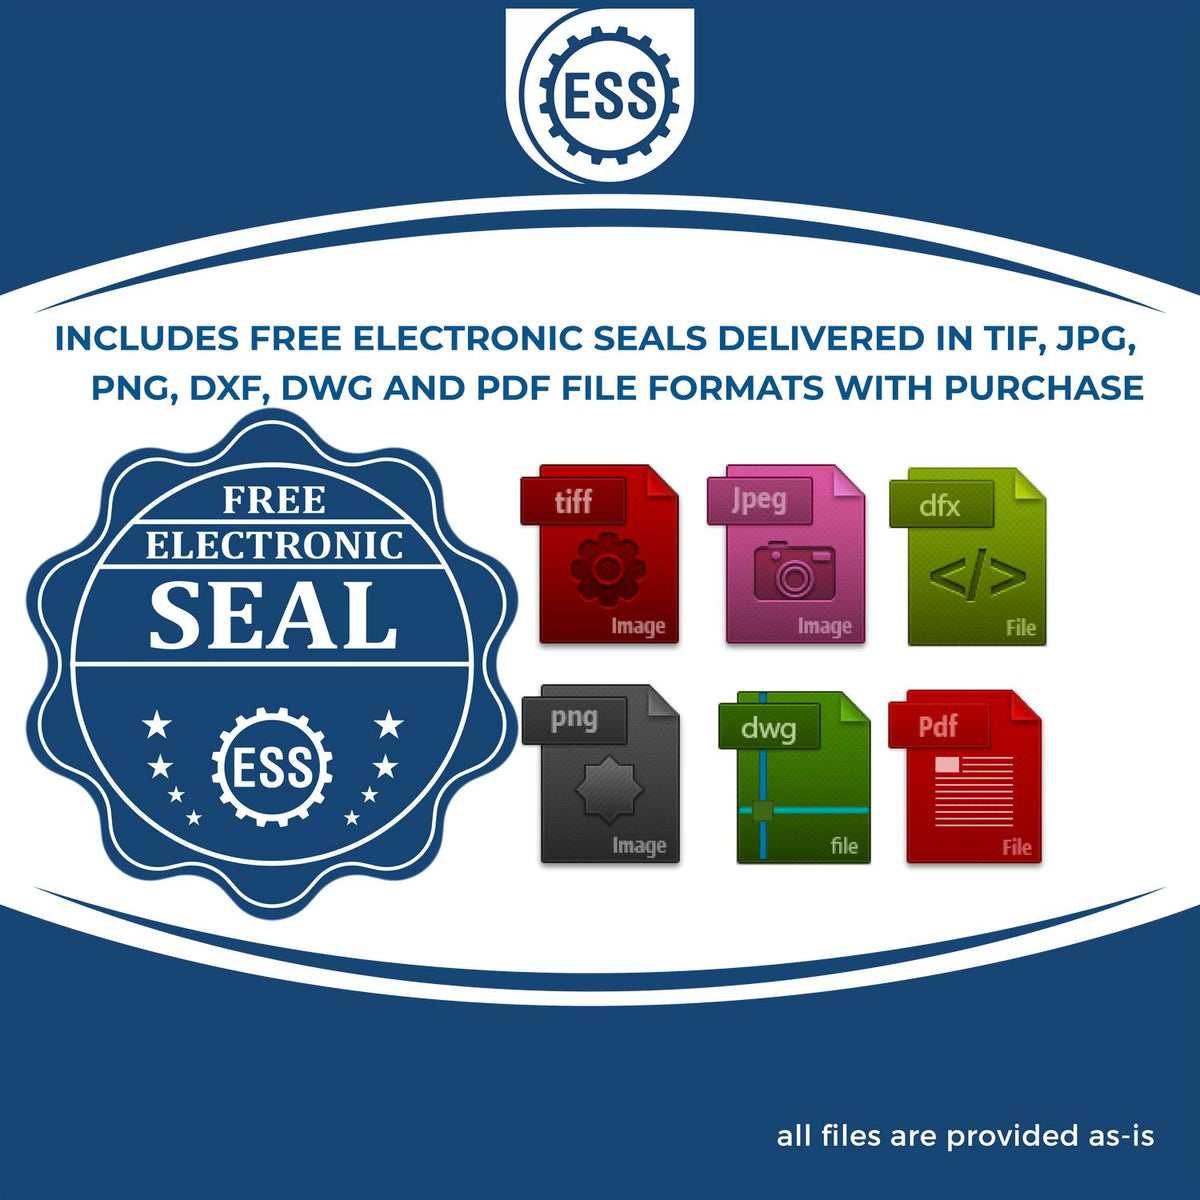 An infographic for the free electronic seal for the Idaho Desk Architect Embossing Seal illustrating the different file type icons such as DXF, DWG, TIF, JPG and PNG.